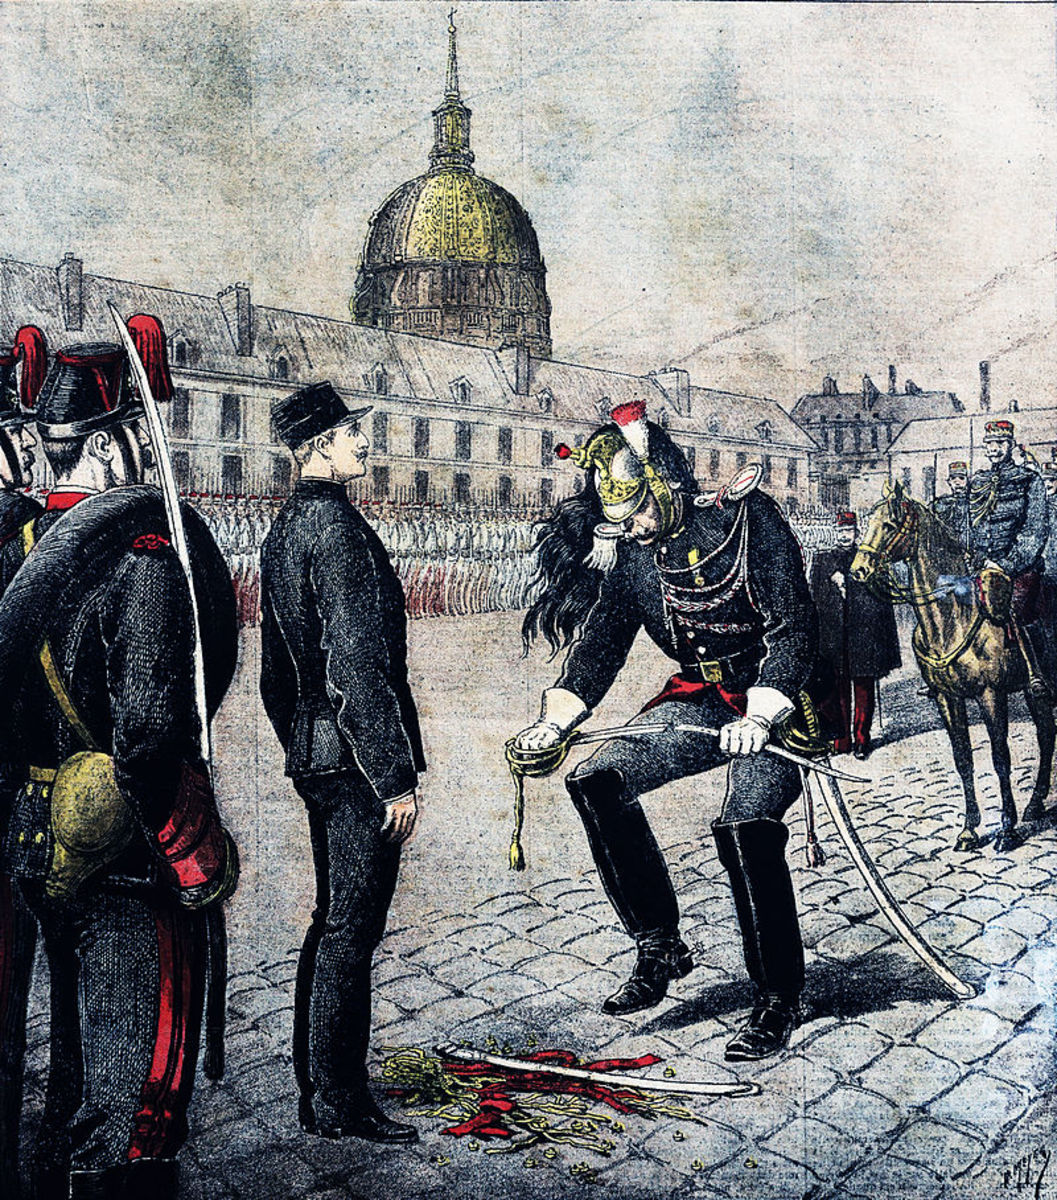 The false accusation of the French artillery officer Alfred Dreyfus of spying for Germany launched a major political crisis in France that did much to radicalize the French right and to form its penchant for antisemitism. 